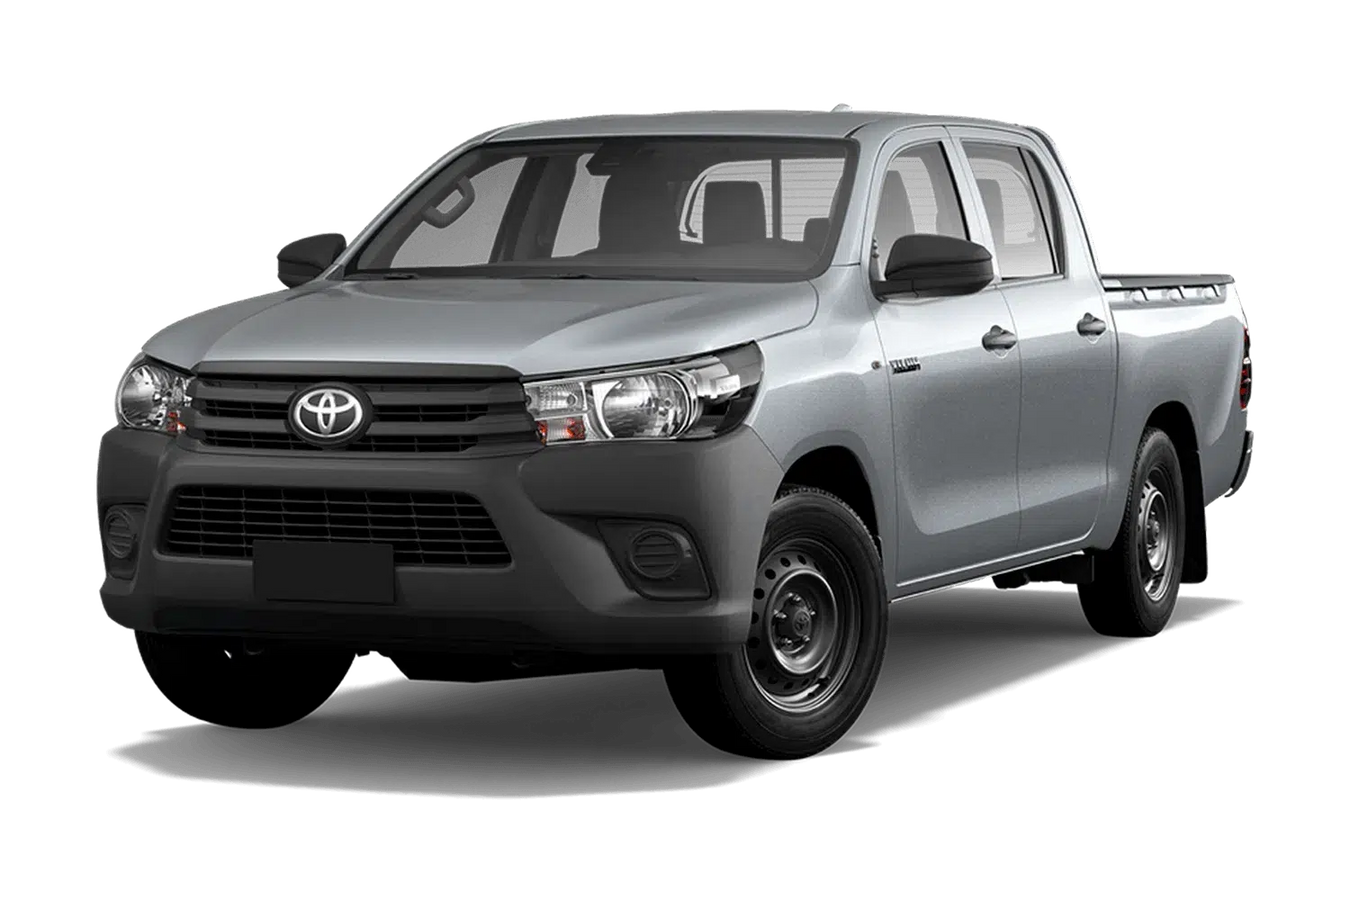 Toyota HiLux 8th Gen Workmate Dual/Extra Cab (Sep 2015 - Now)